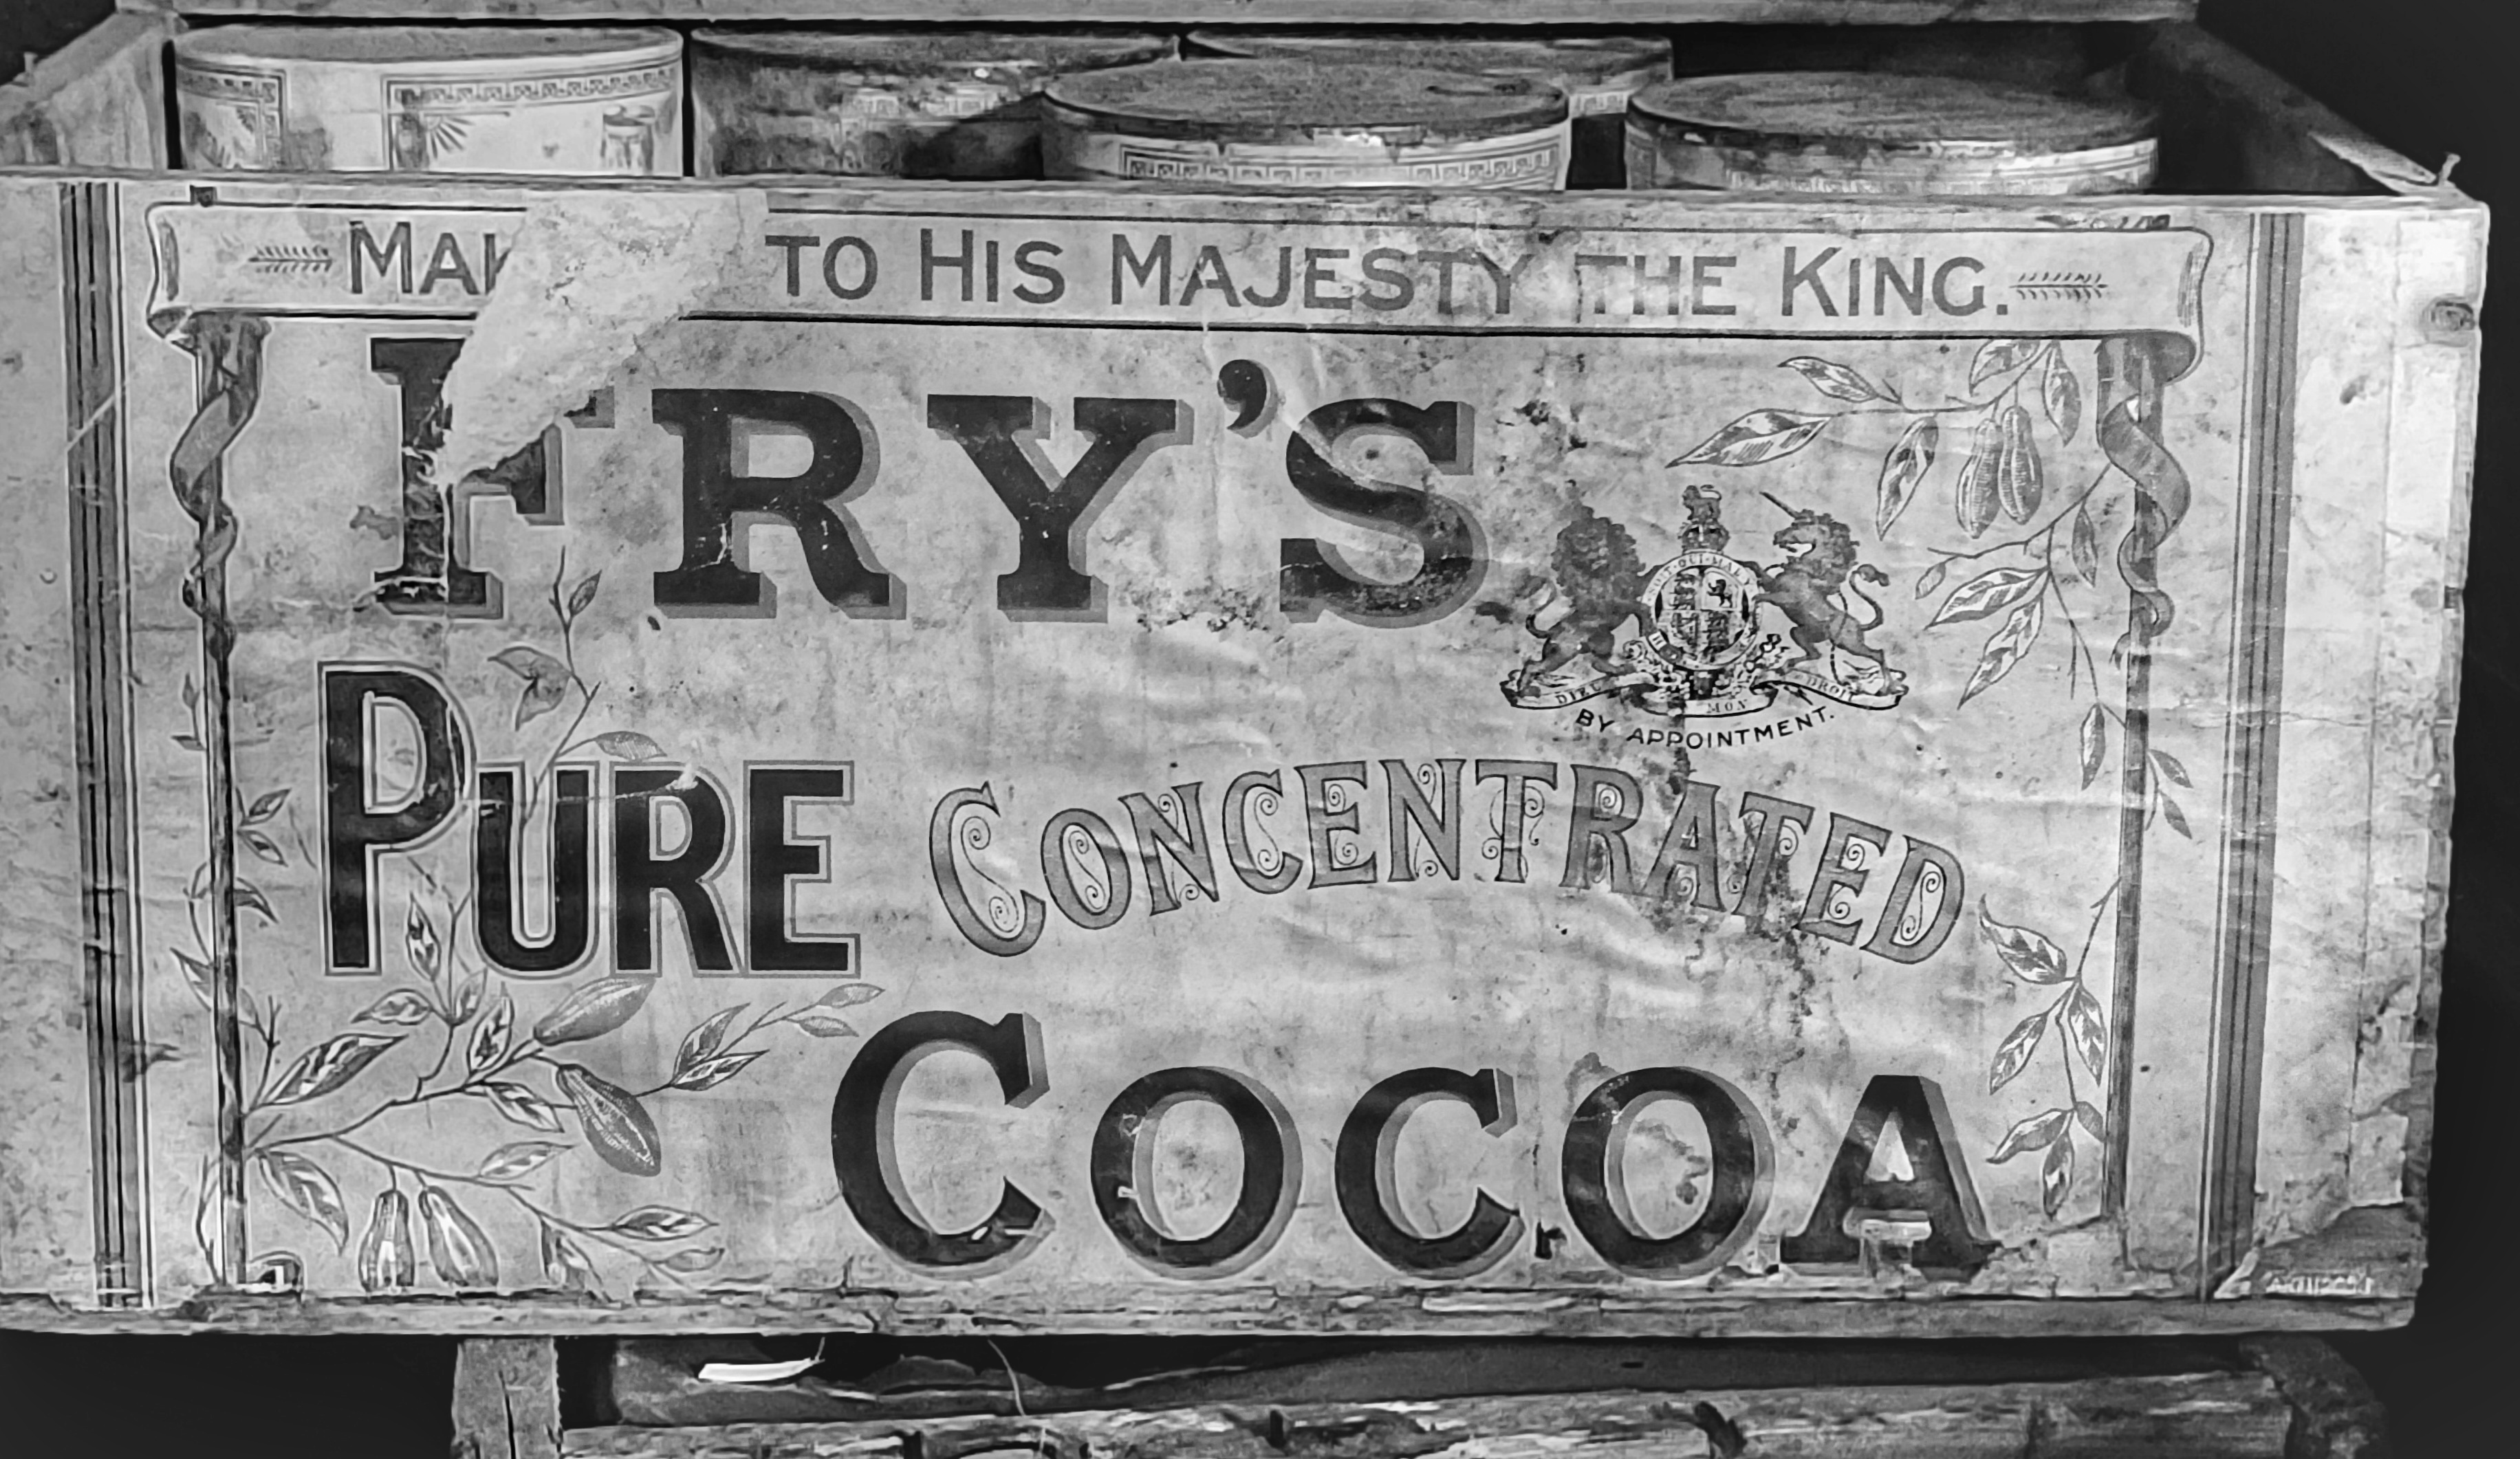 A black and white image of a wooden box containing cocoa.